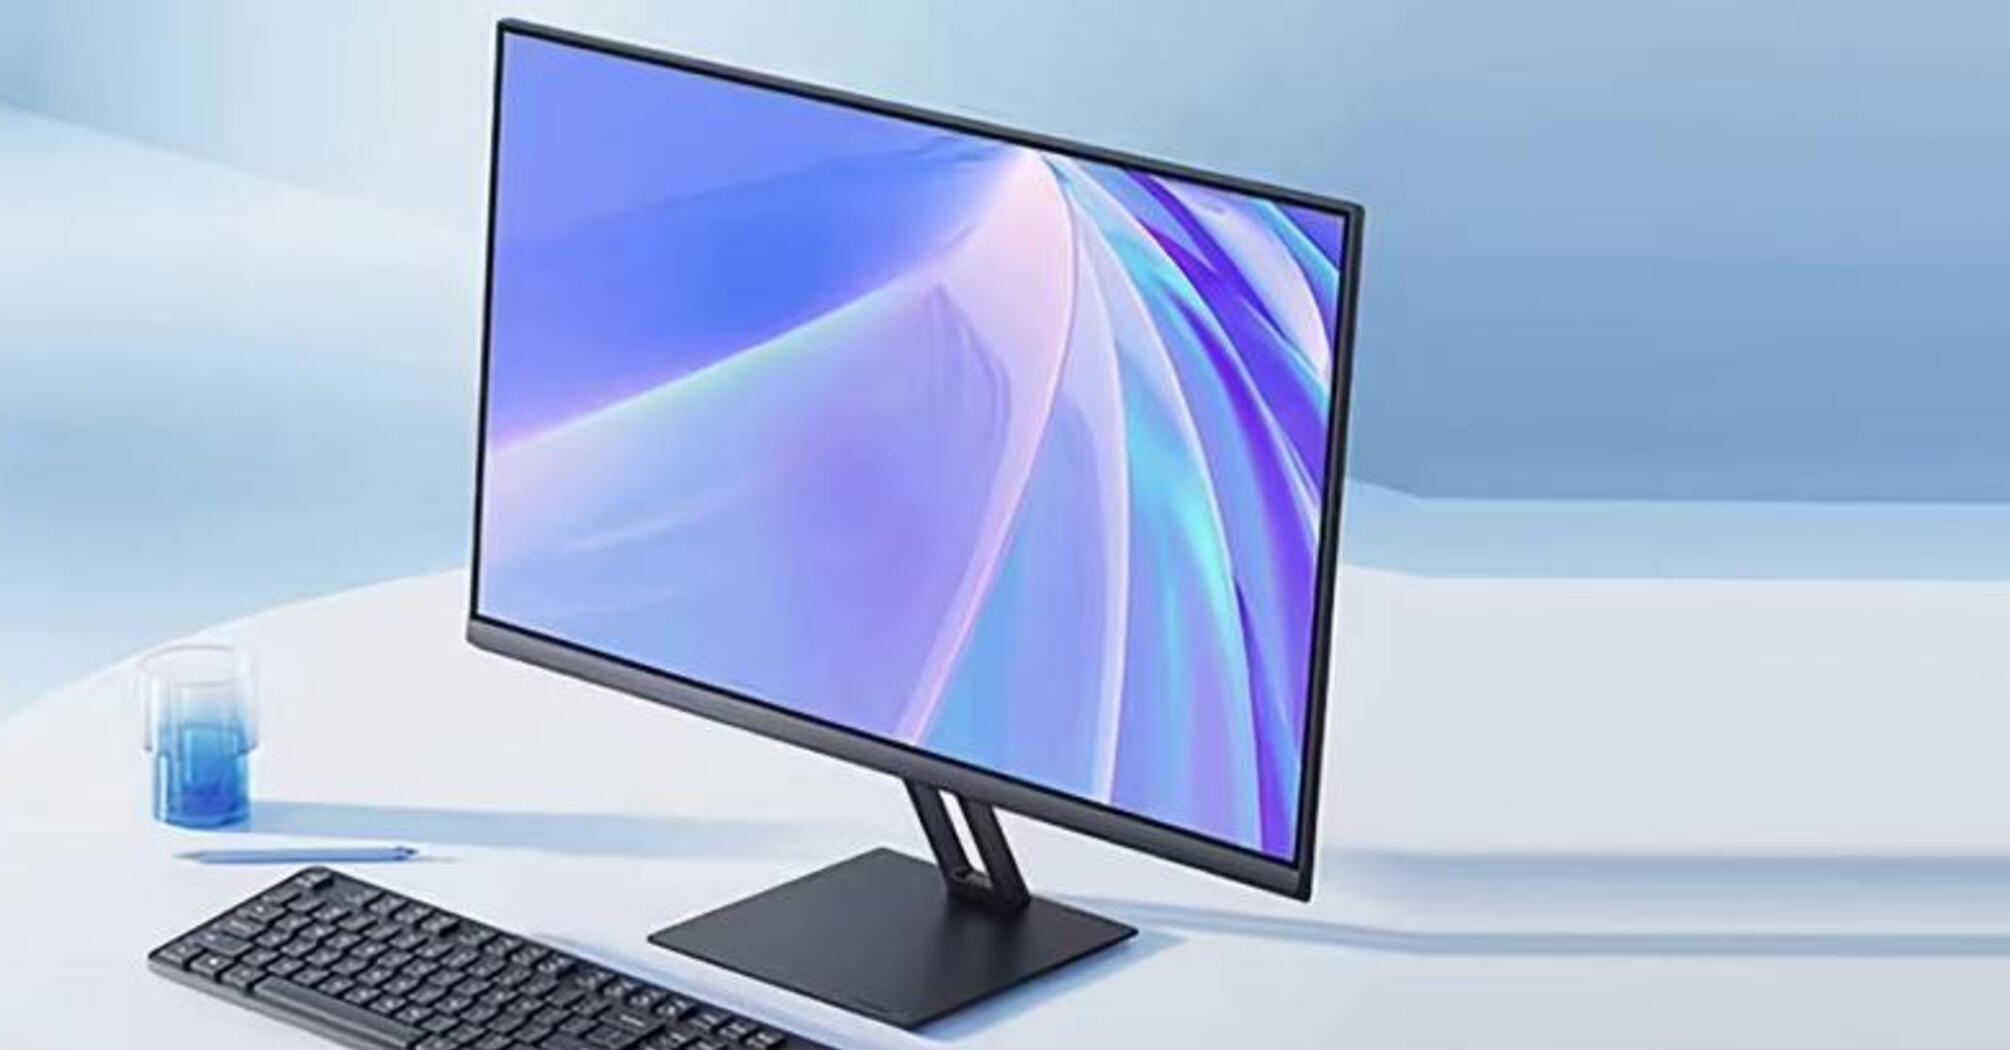 Xiaomi's latest Redmi monitor: what you need to know about it